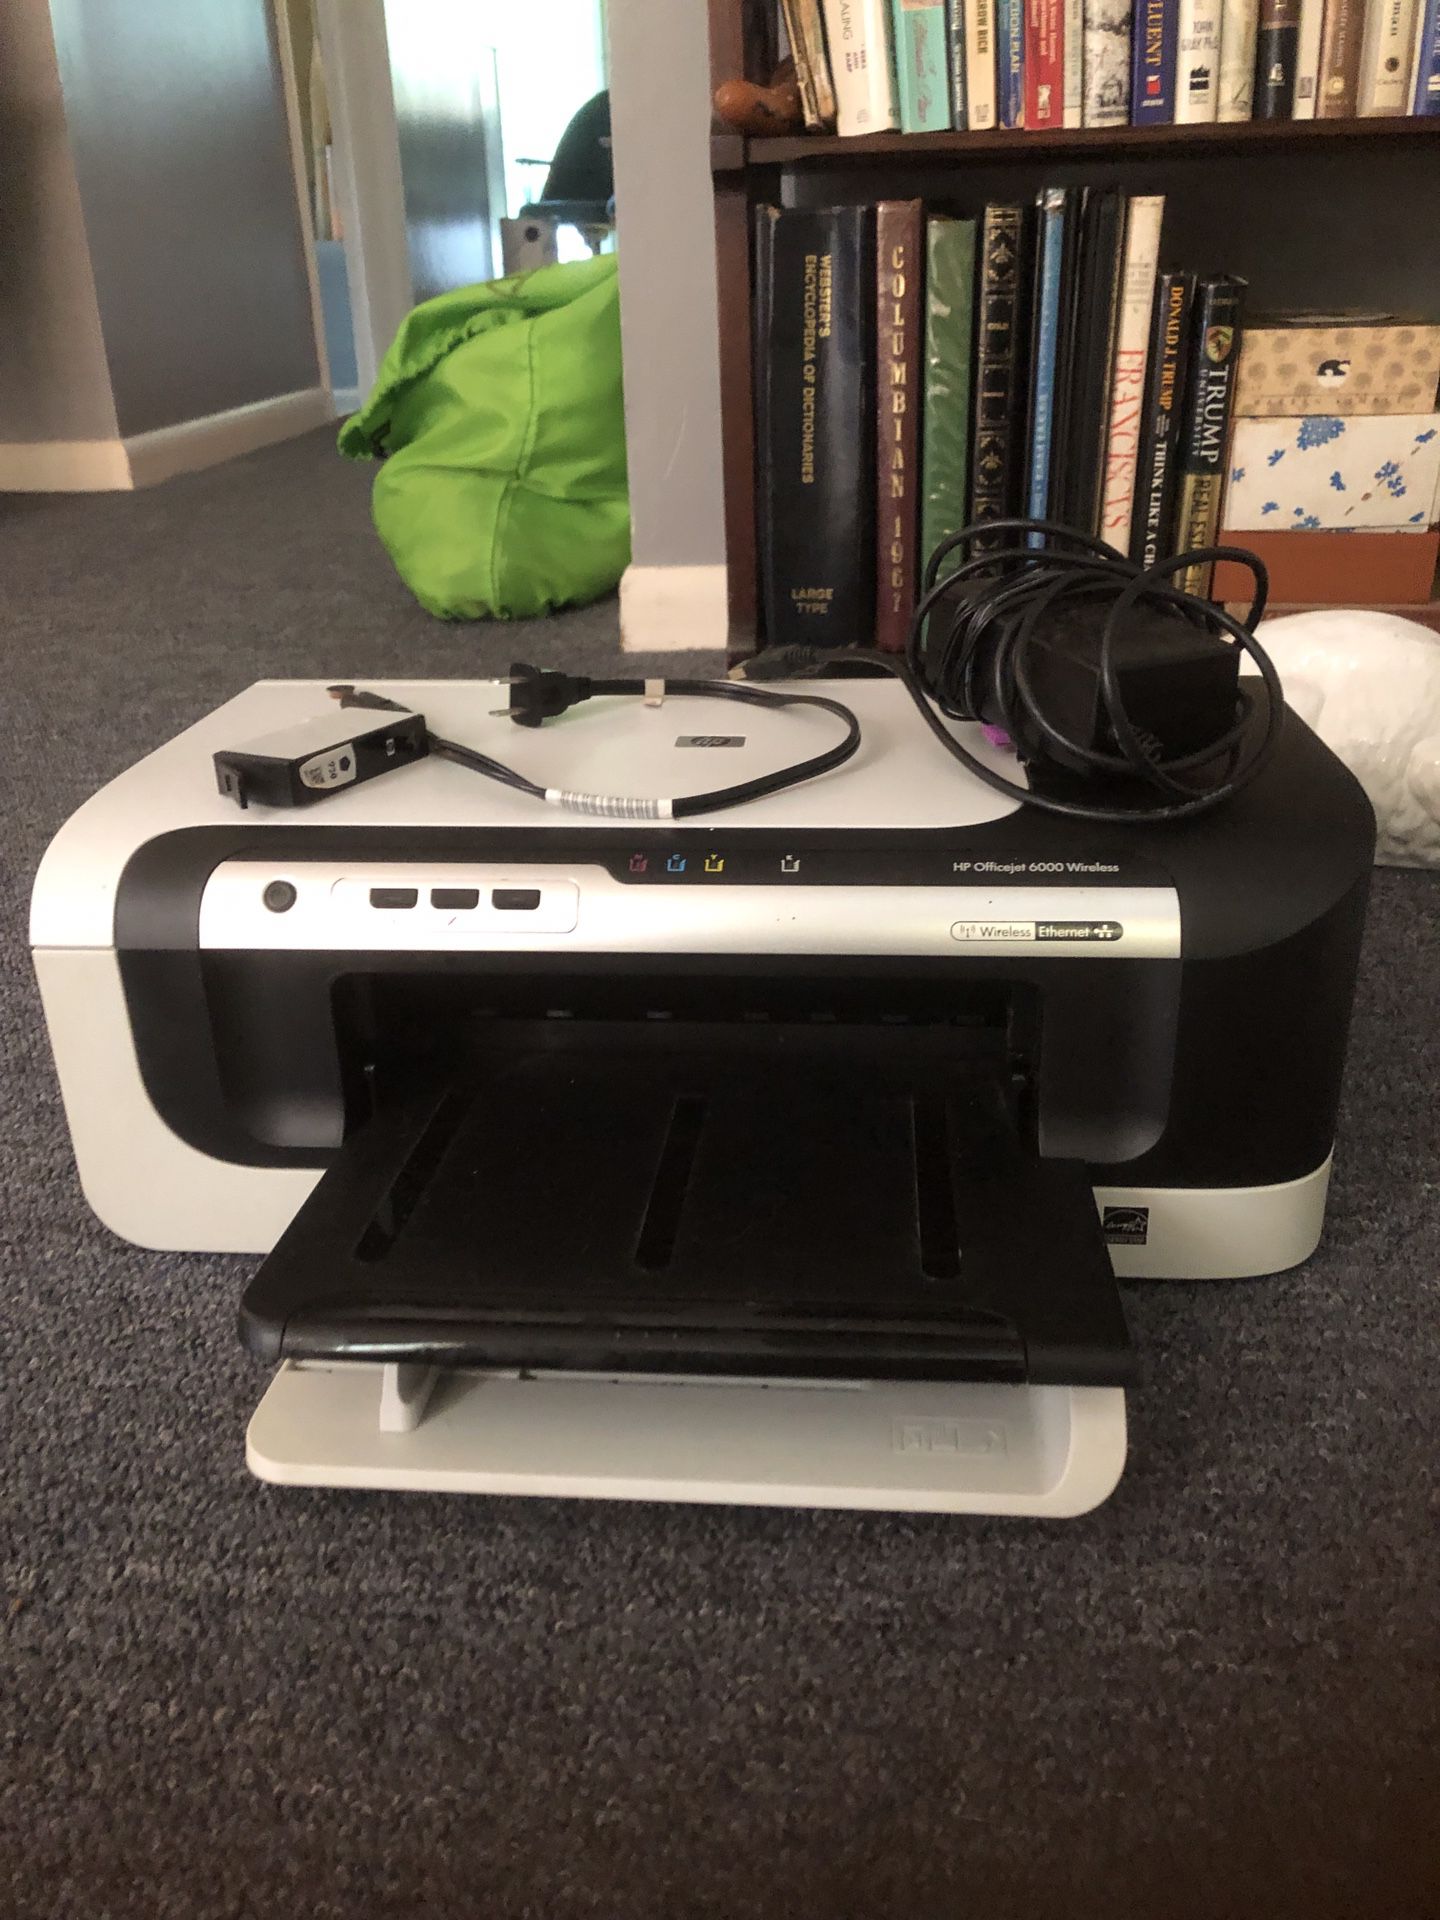 HP office jet 6000 wireless color printer. Like new, rarely used. $200